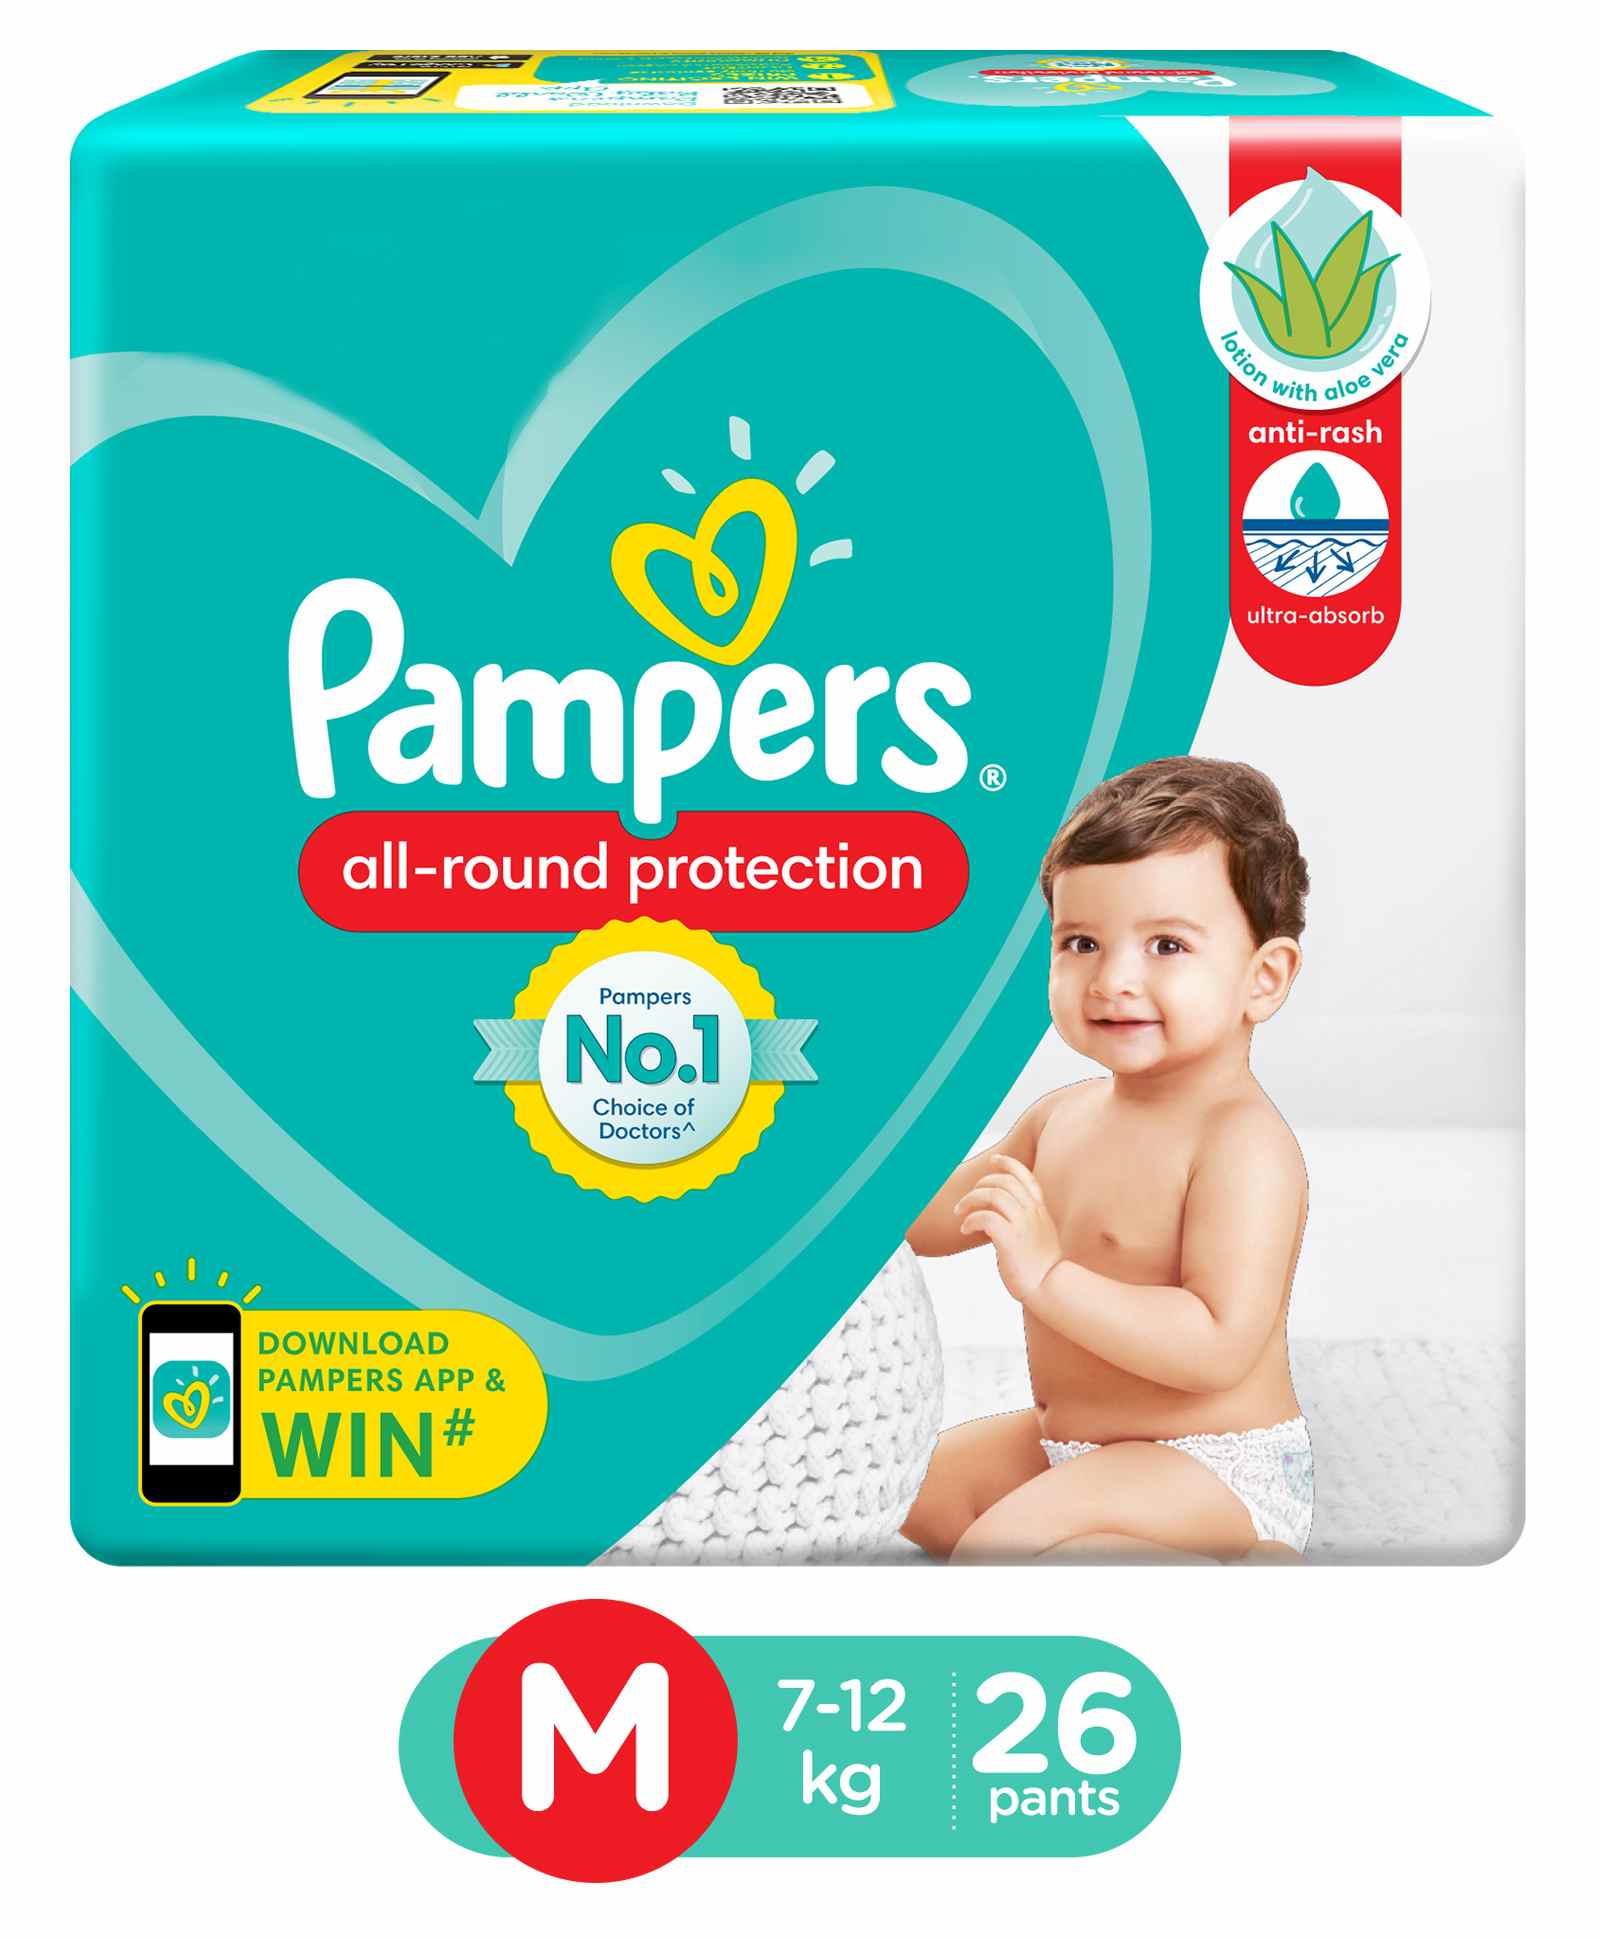 Pampers All-round P. Baby Diaper M (7-12 Kg) 26 Pants